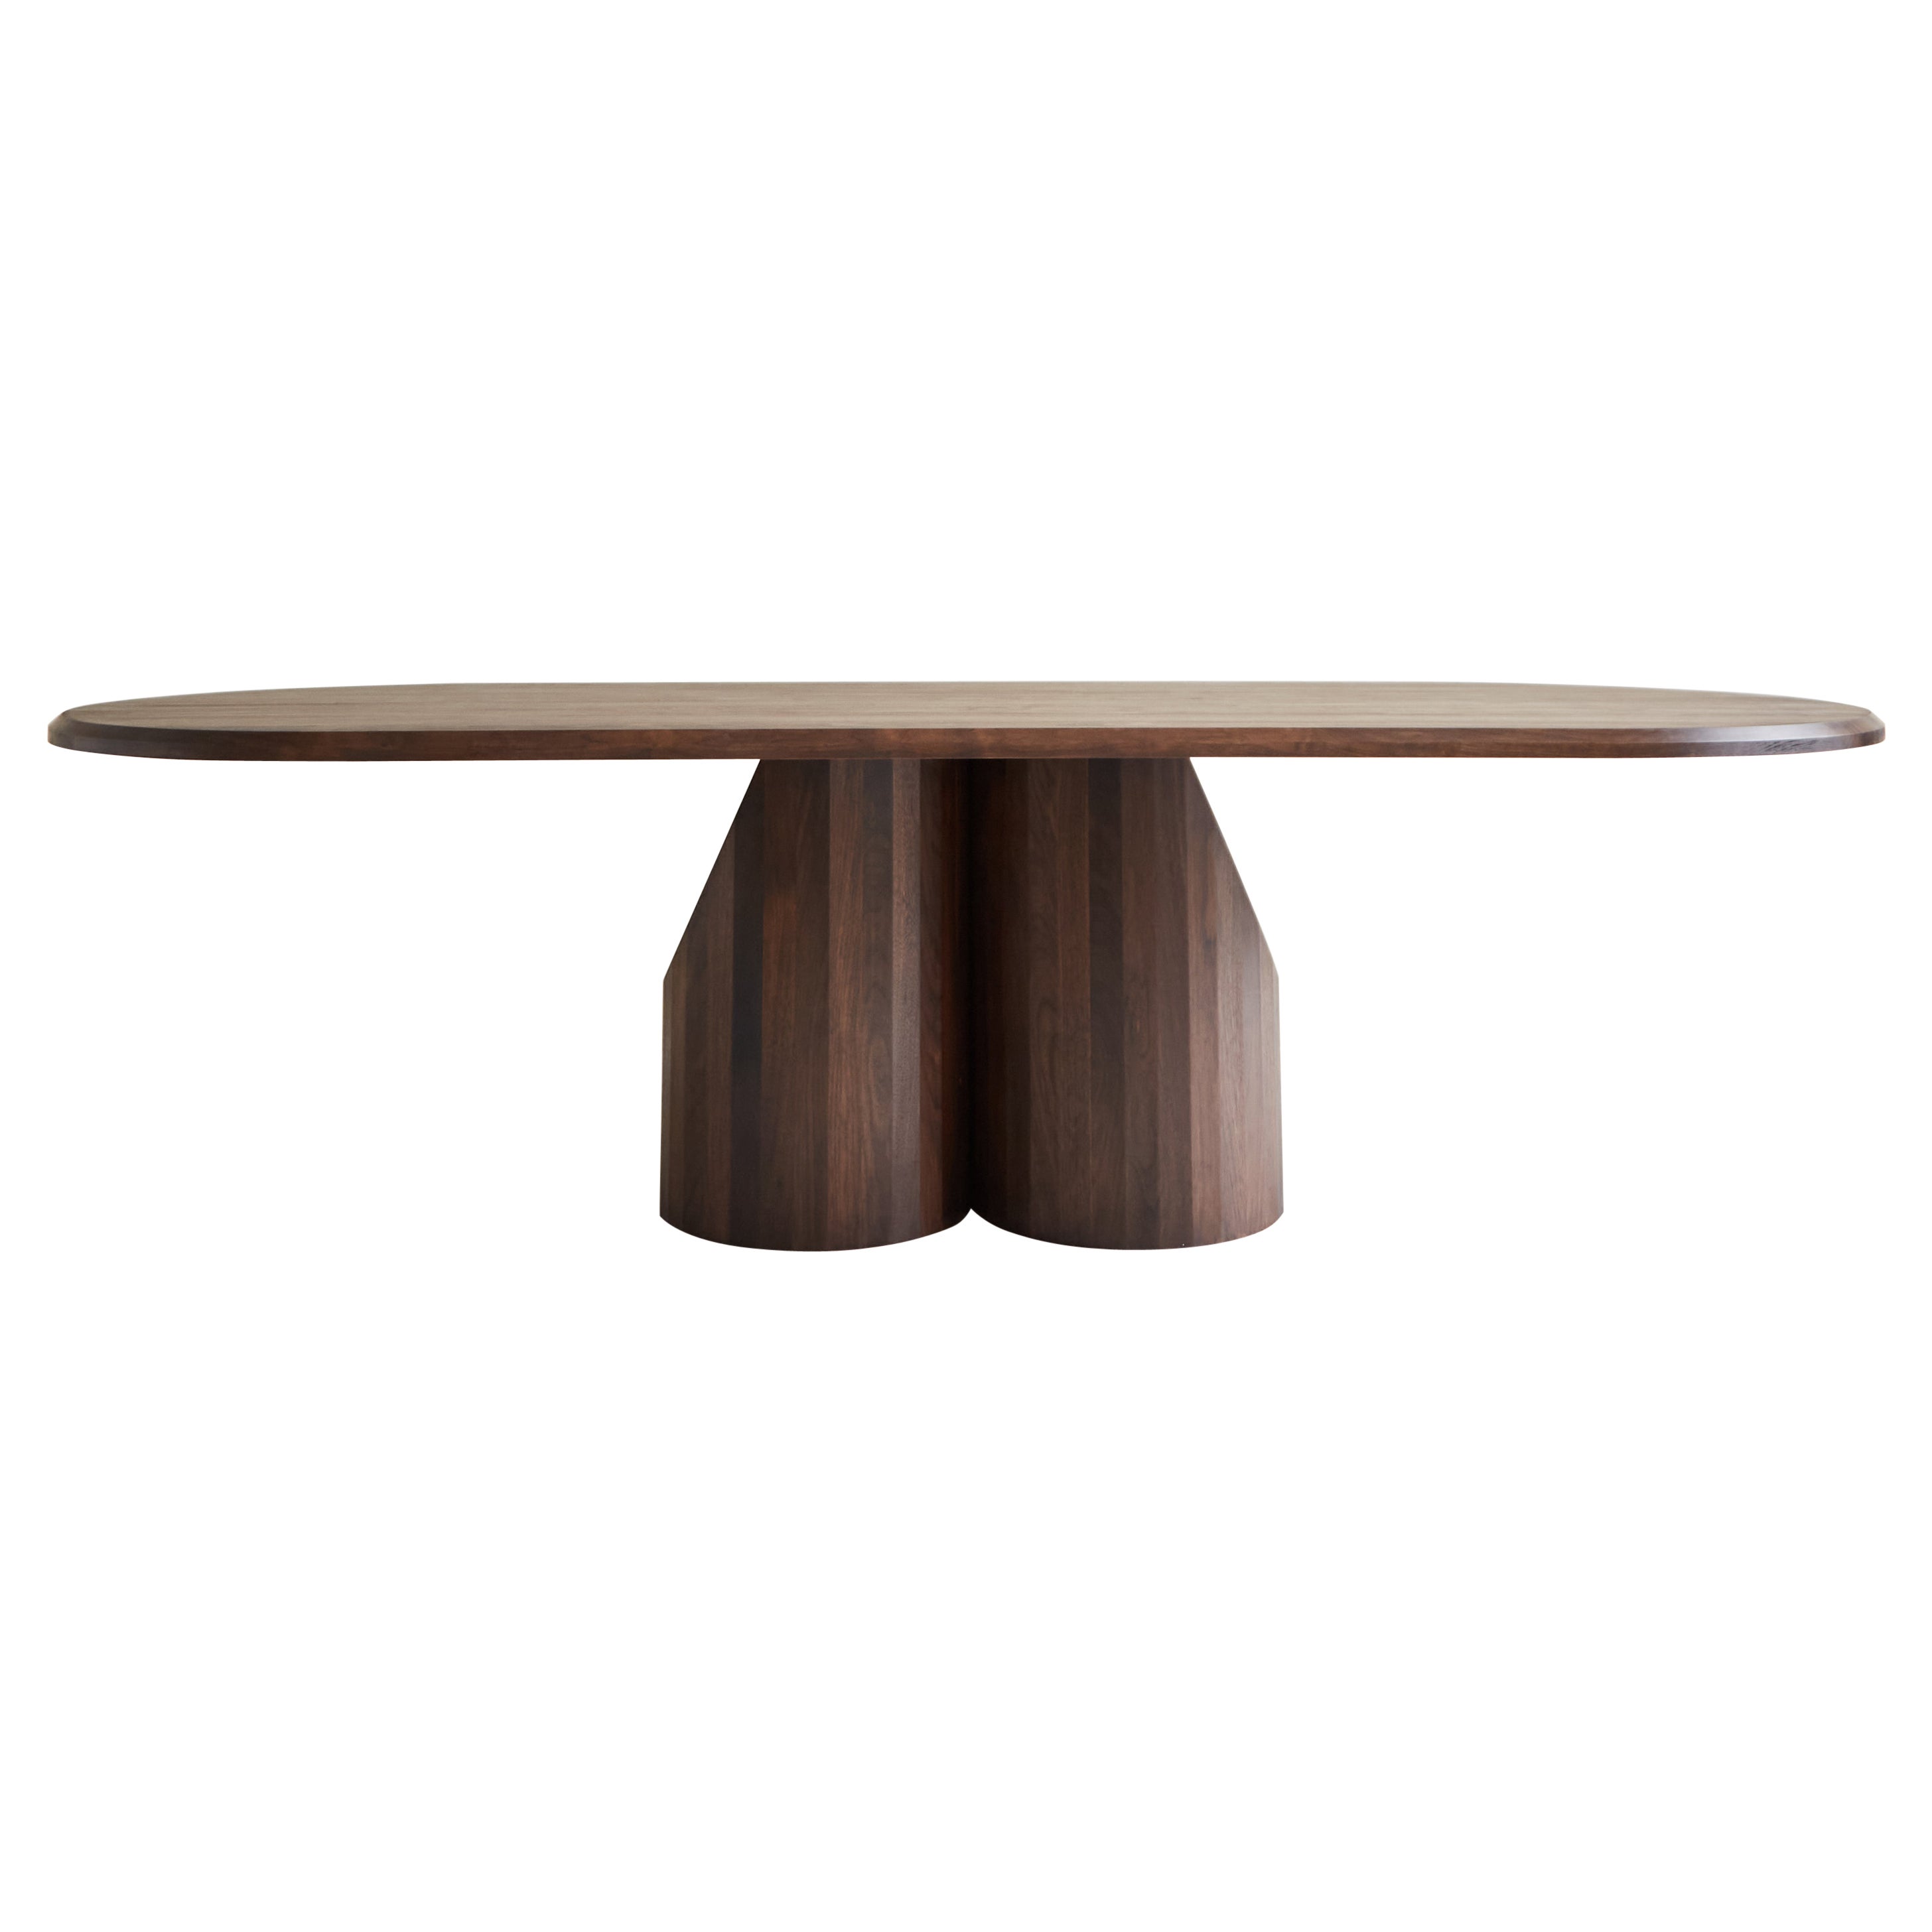 Handcrafted Solid Walnut Barrow Dining Table 84"L by Mary Ratcliffe Studio